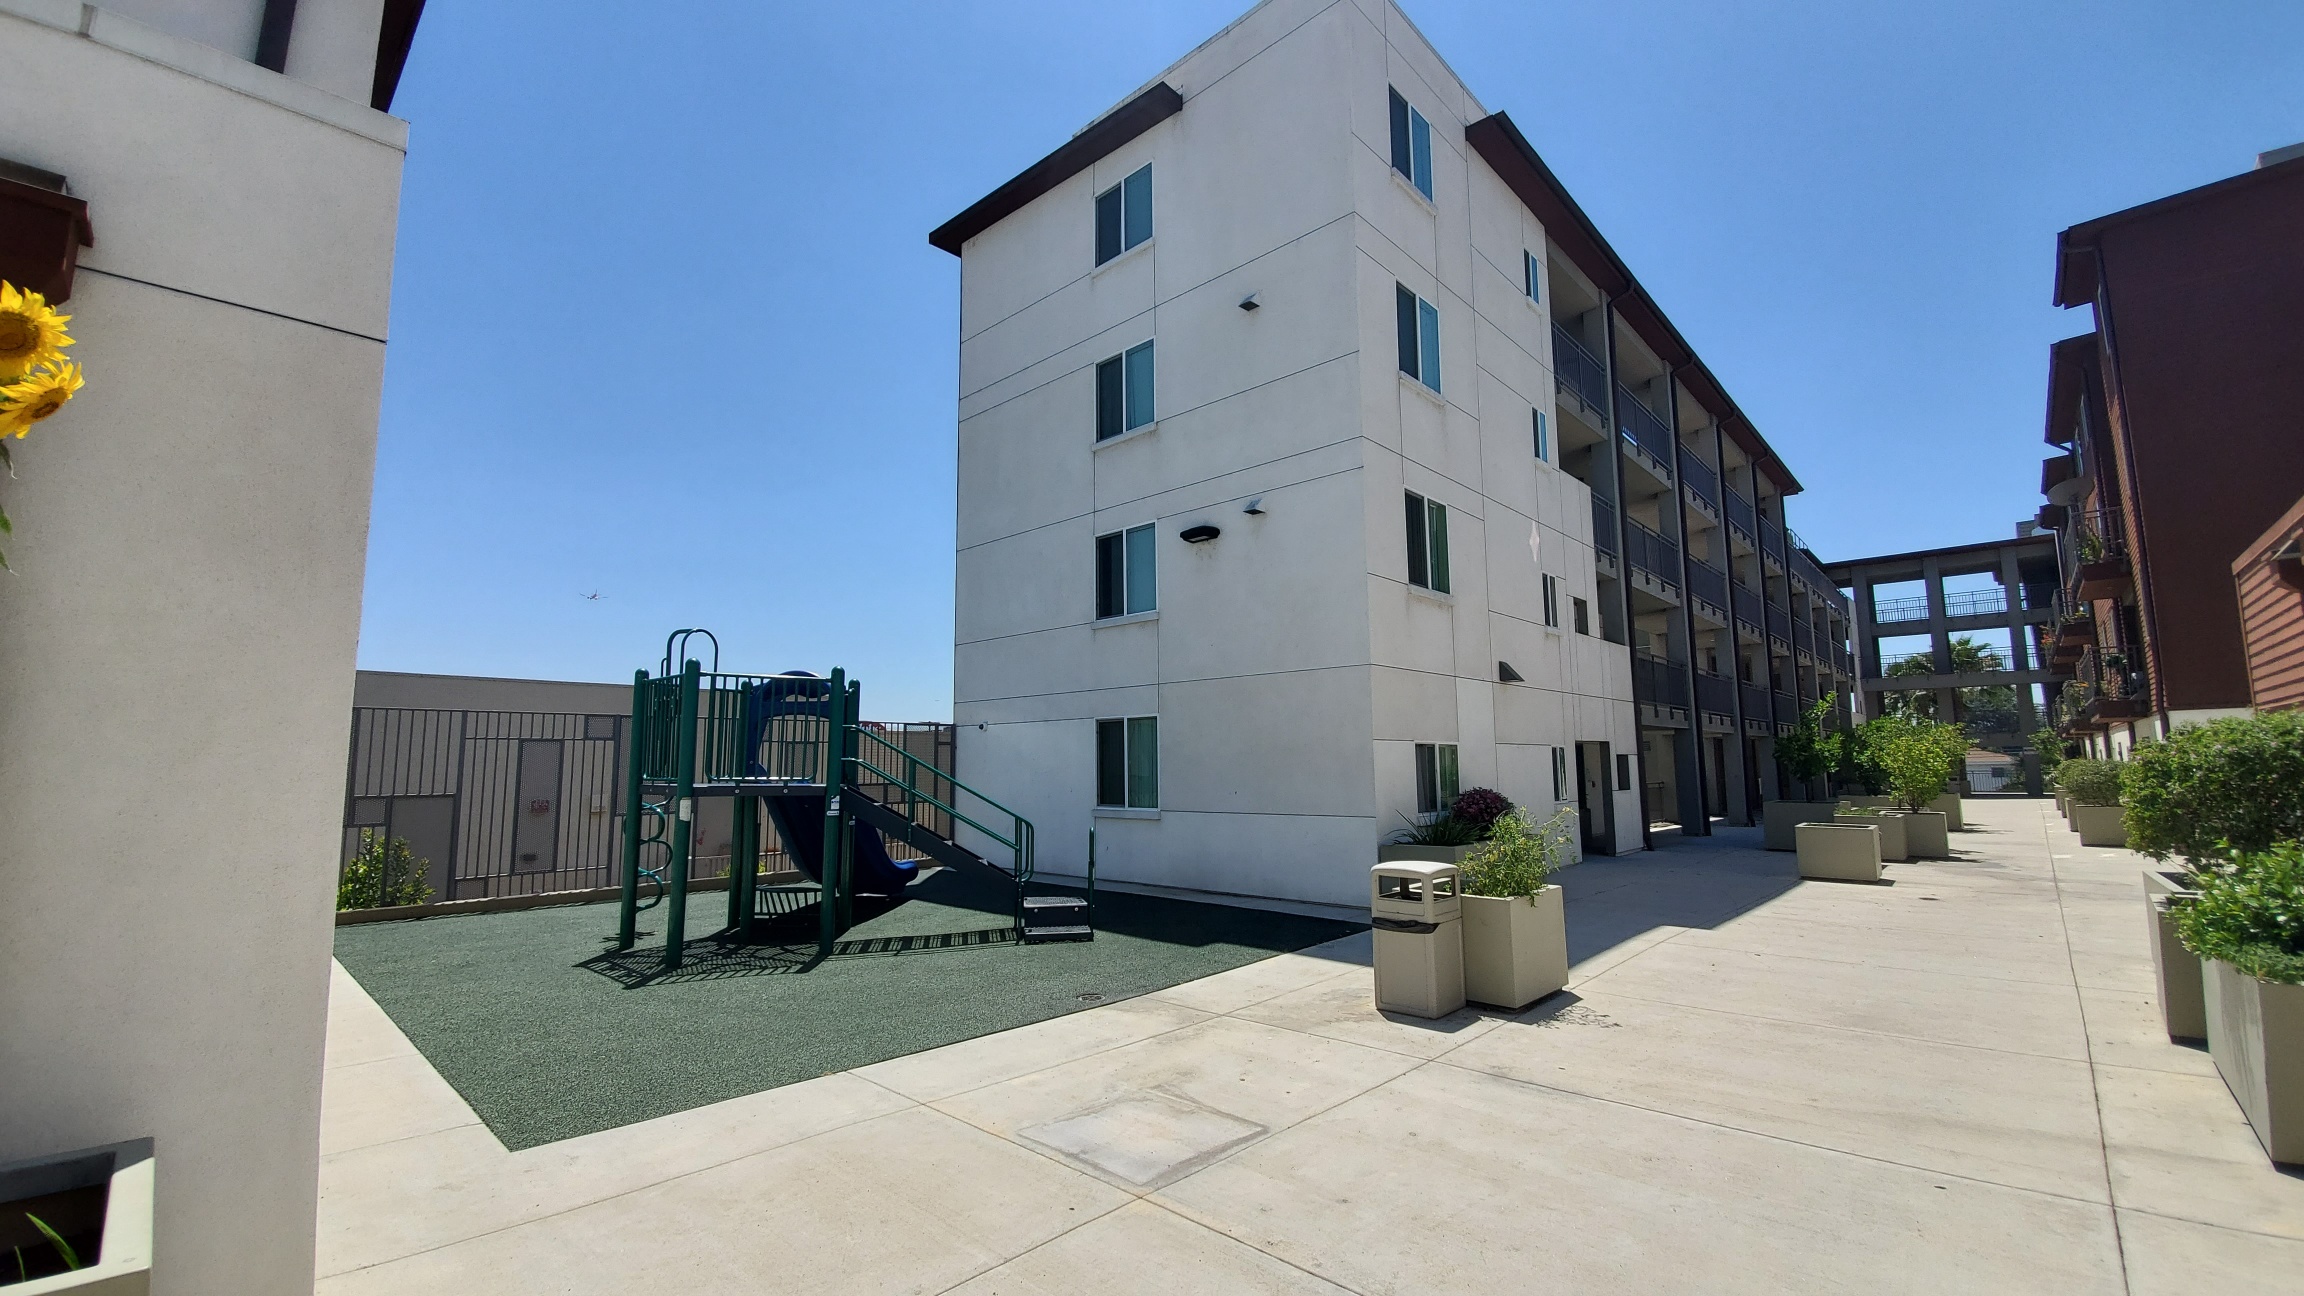 Different anlgle of a playground that is inside a complex. Playground is in an open space. It consists of a slide, stairs, and a climbing ladder. The ground is padded. There are adjacent units on both sides of the playground, and a variety of plants in re